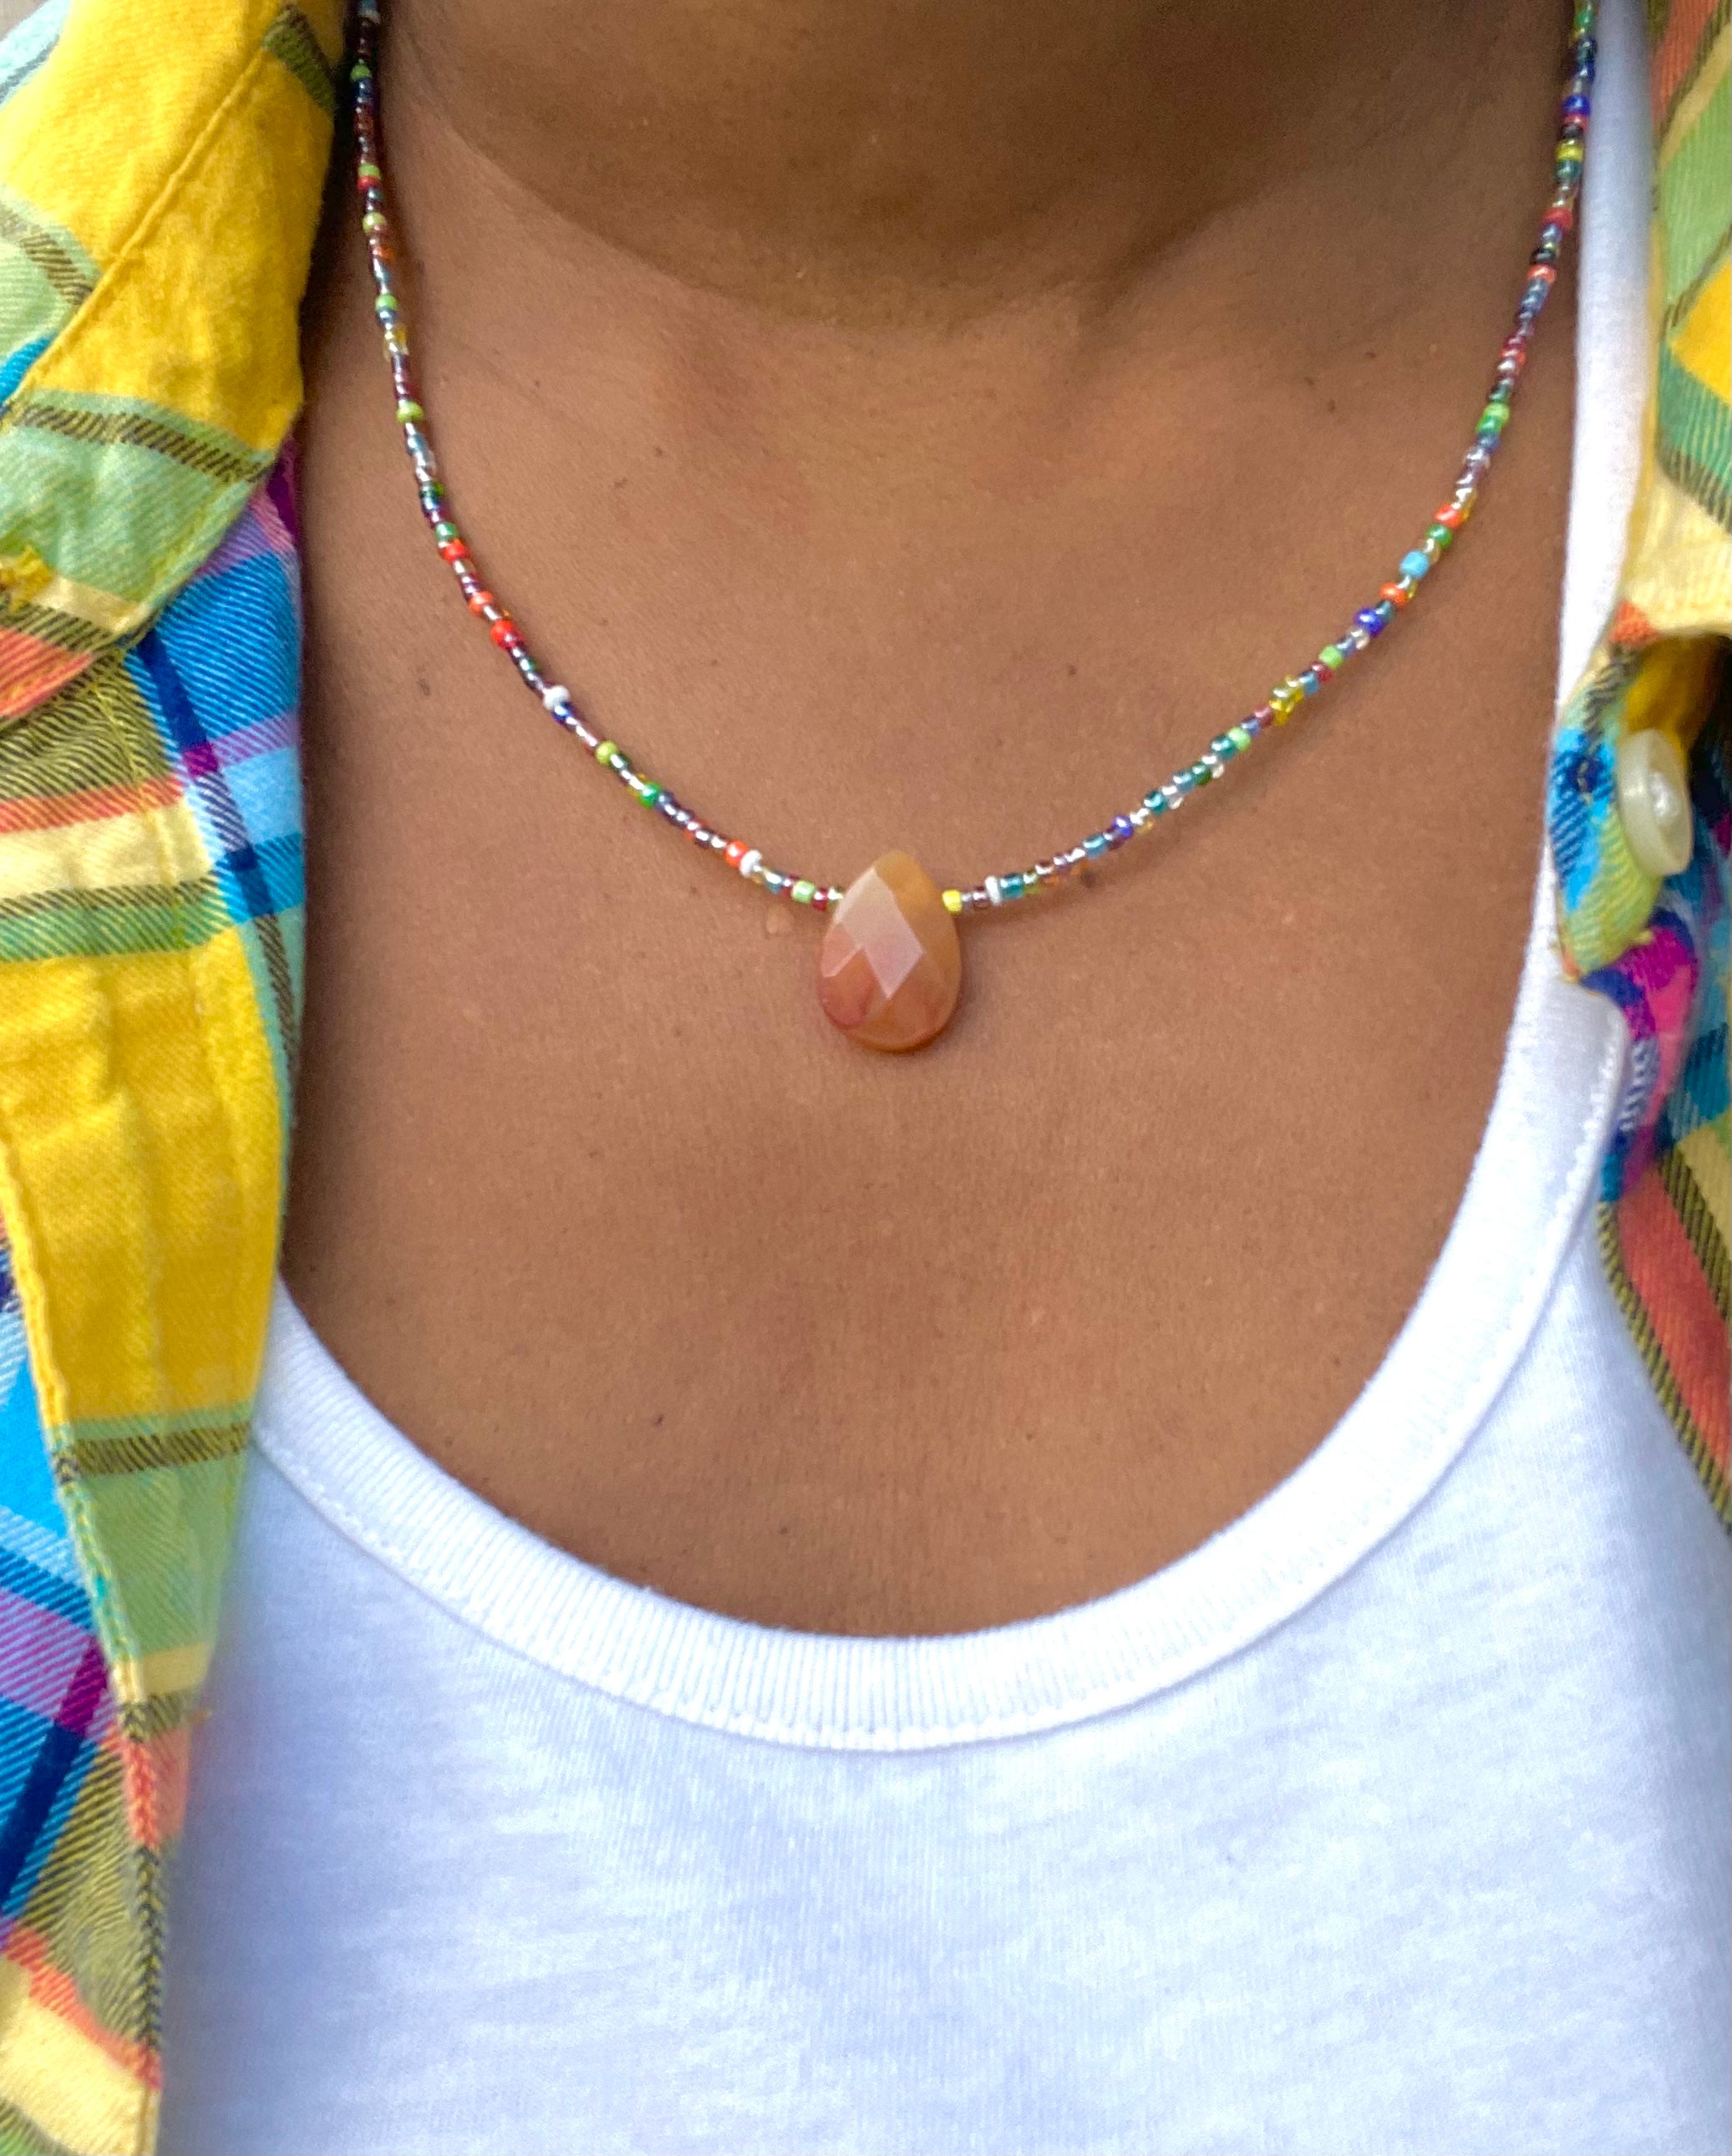 Sun-kissed necklace